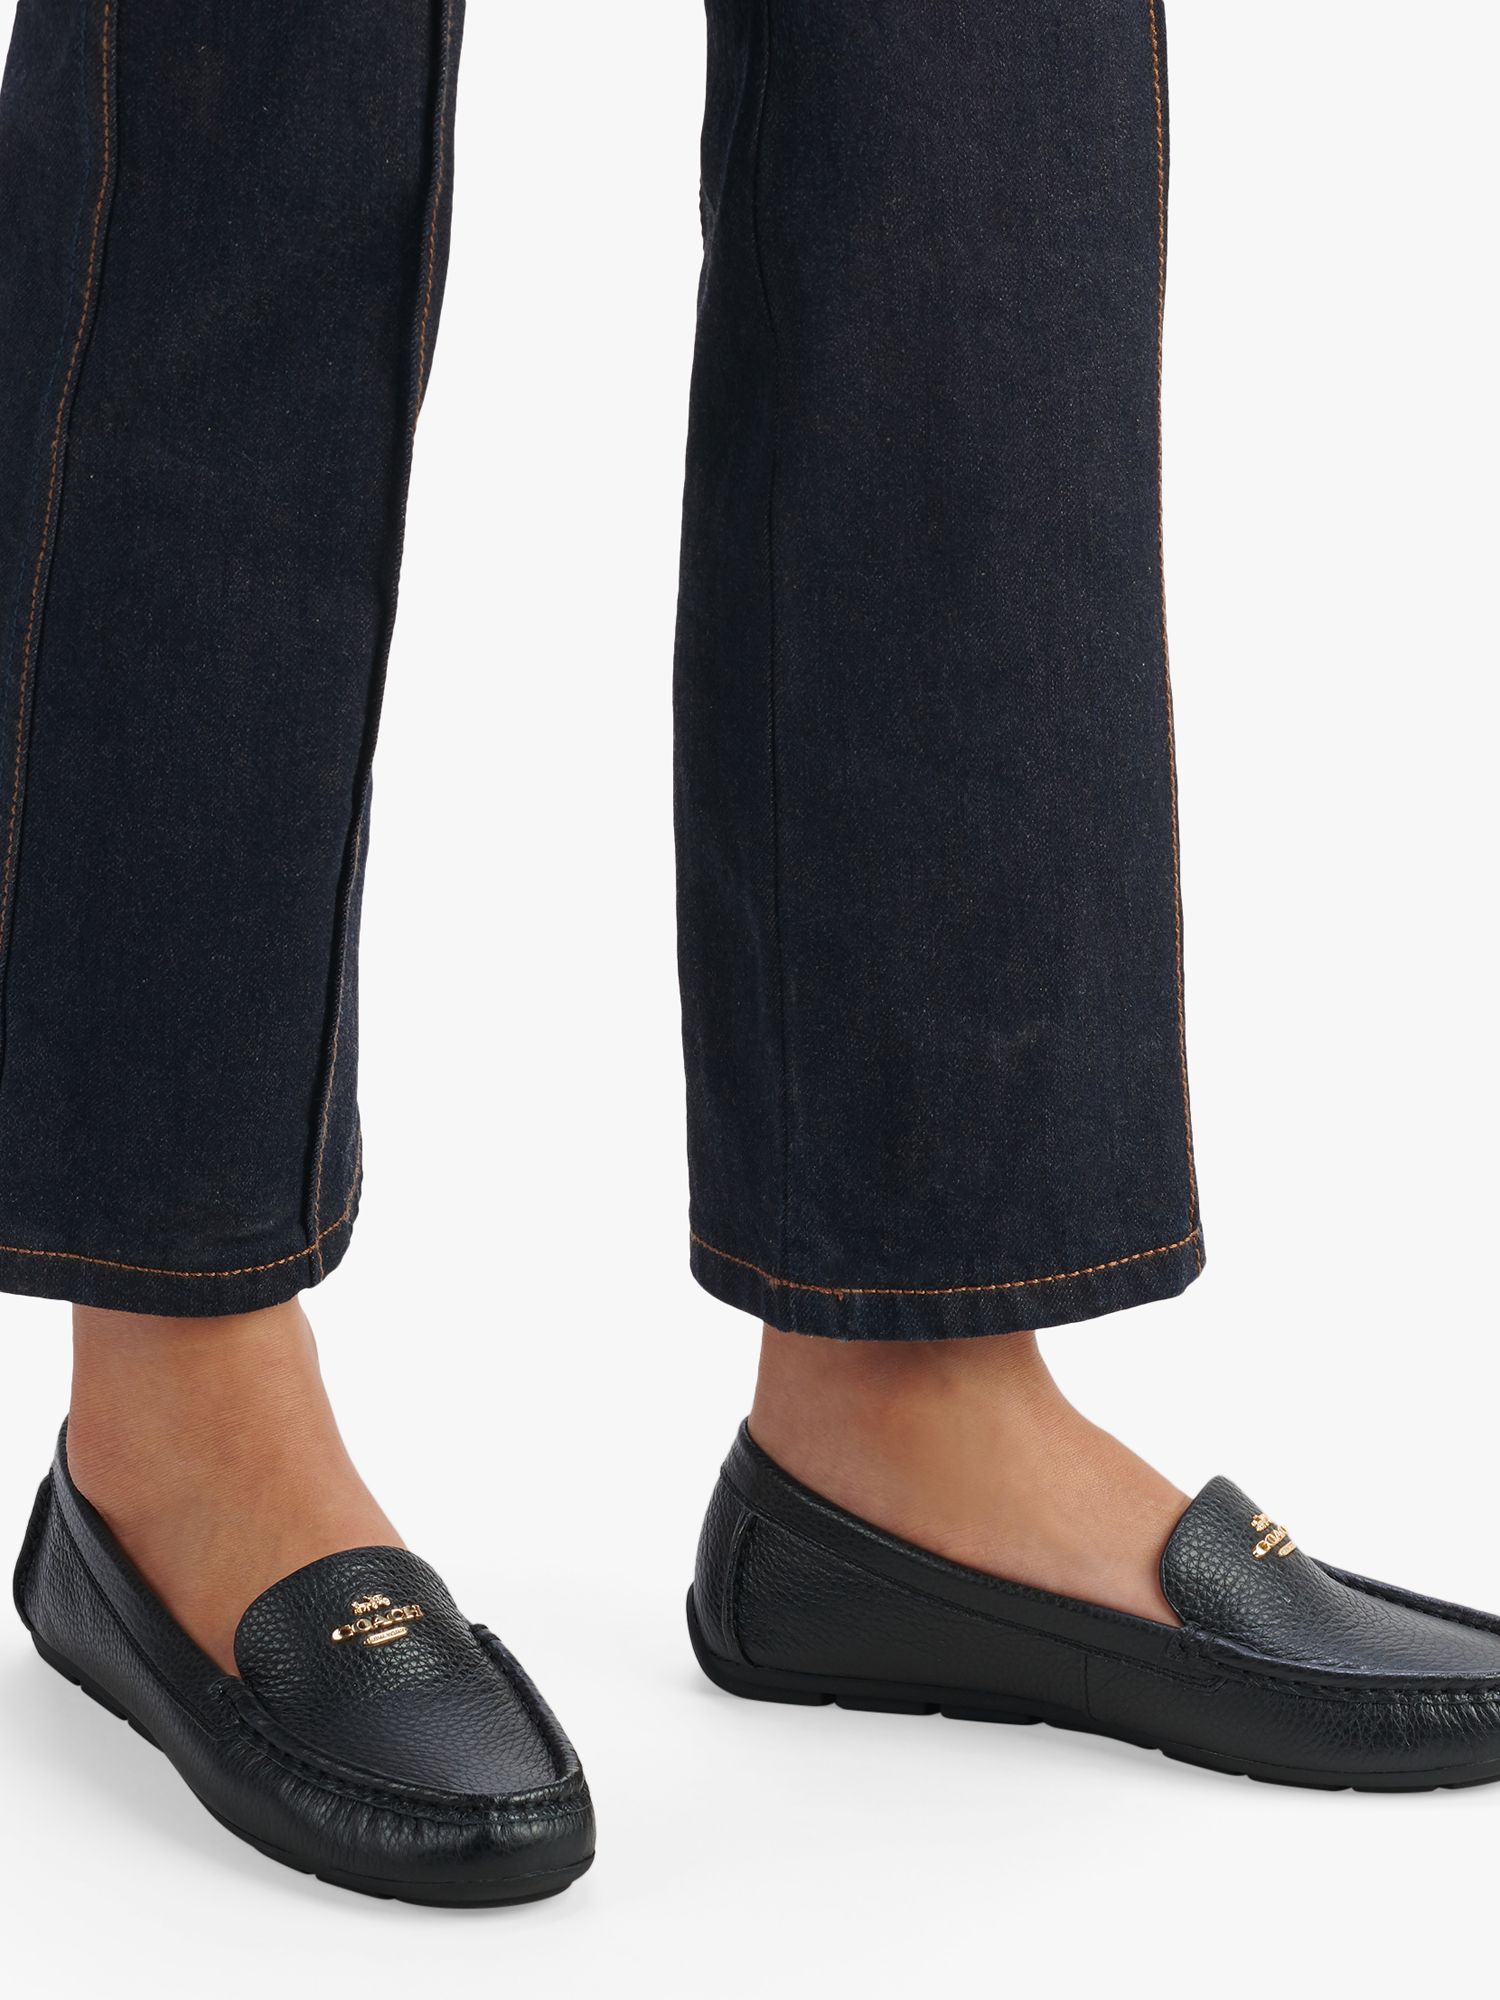 Coach Marley Driver Loafers, Black at John Lewis & Partners